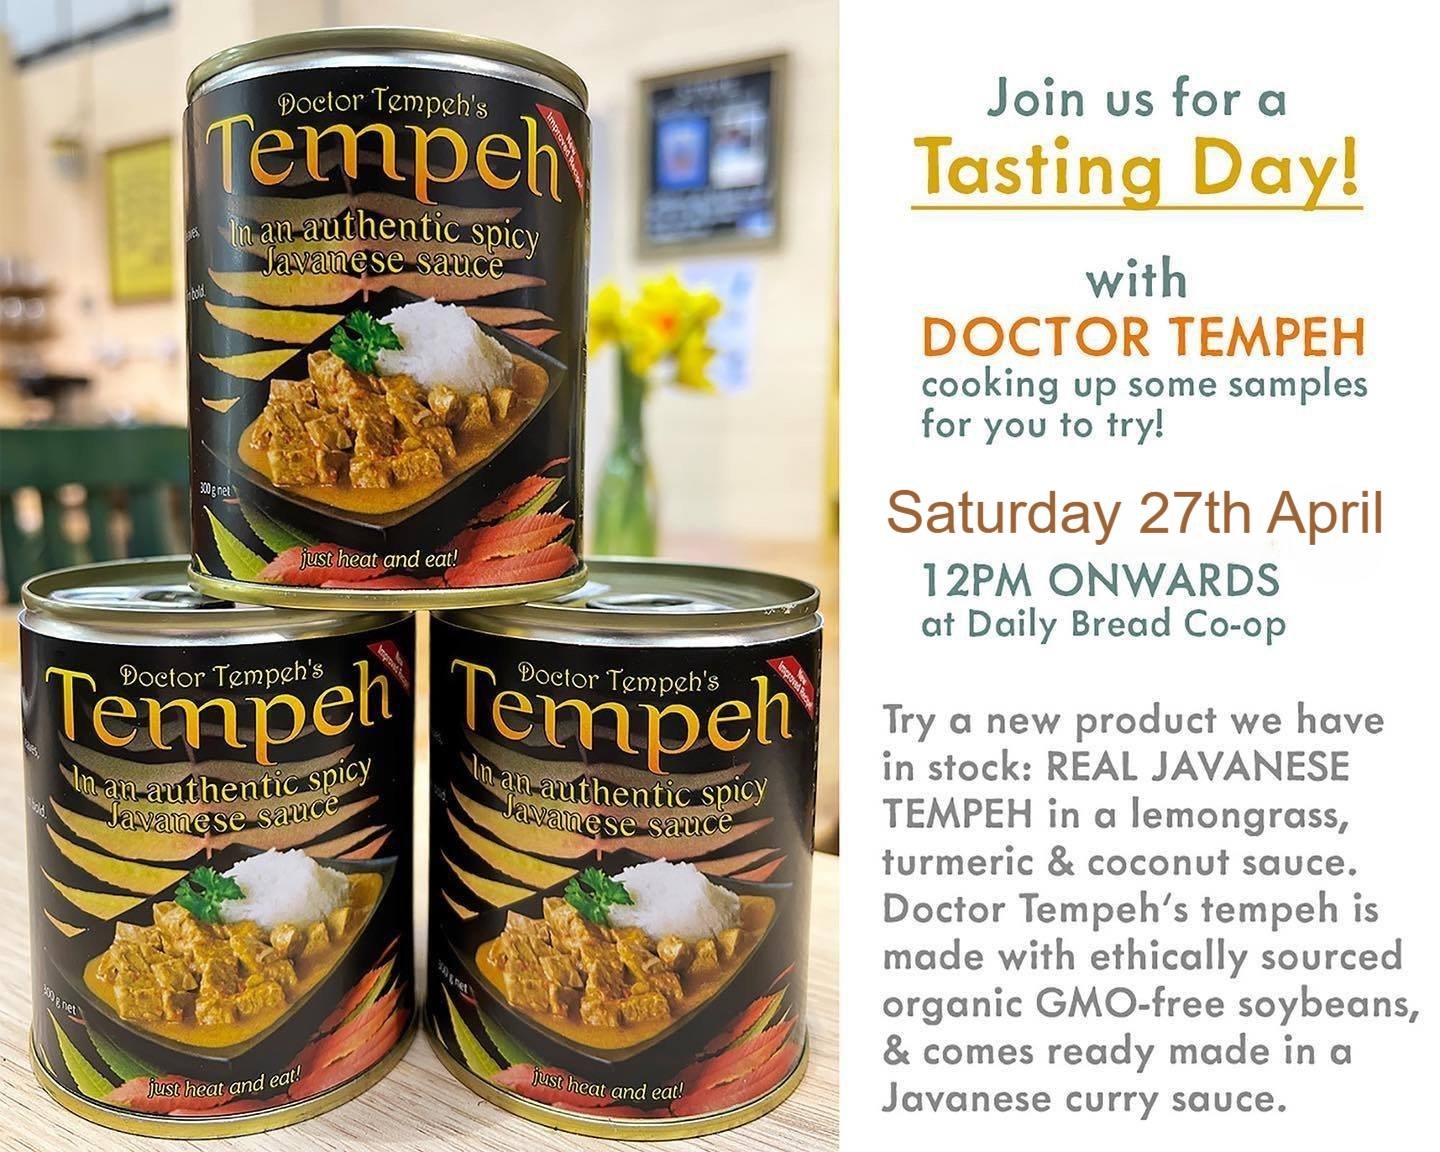 TASTING EVENT TOMORROW!
Drop in on Saturday 27th April from 12pm and meet DOCTOR TEMPEH who'll be cooking up some of his spicy, sauce-y vegan Javanese tempeh for you to try!

#doctortempeh #drtempeh #tempeh #javanesefood #dailybreadcambridge #kingshe